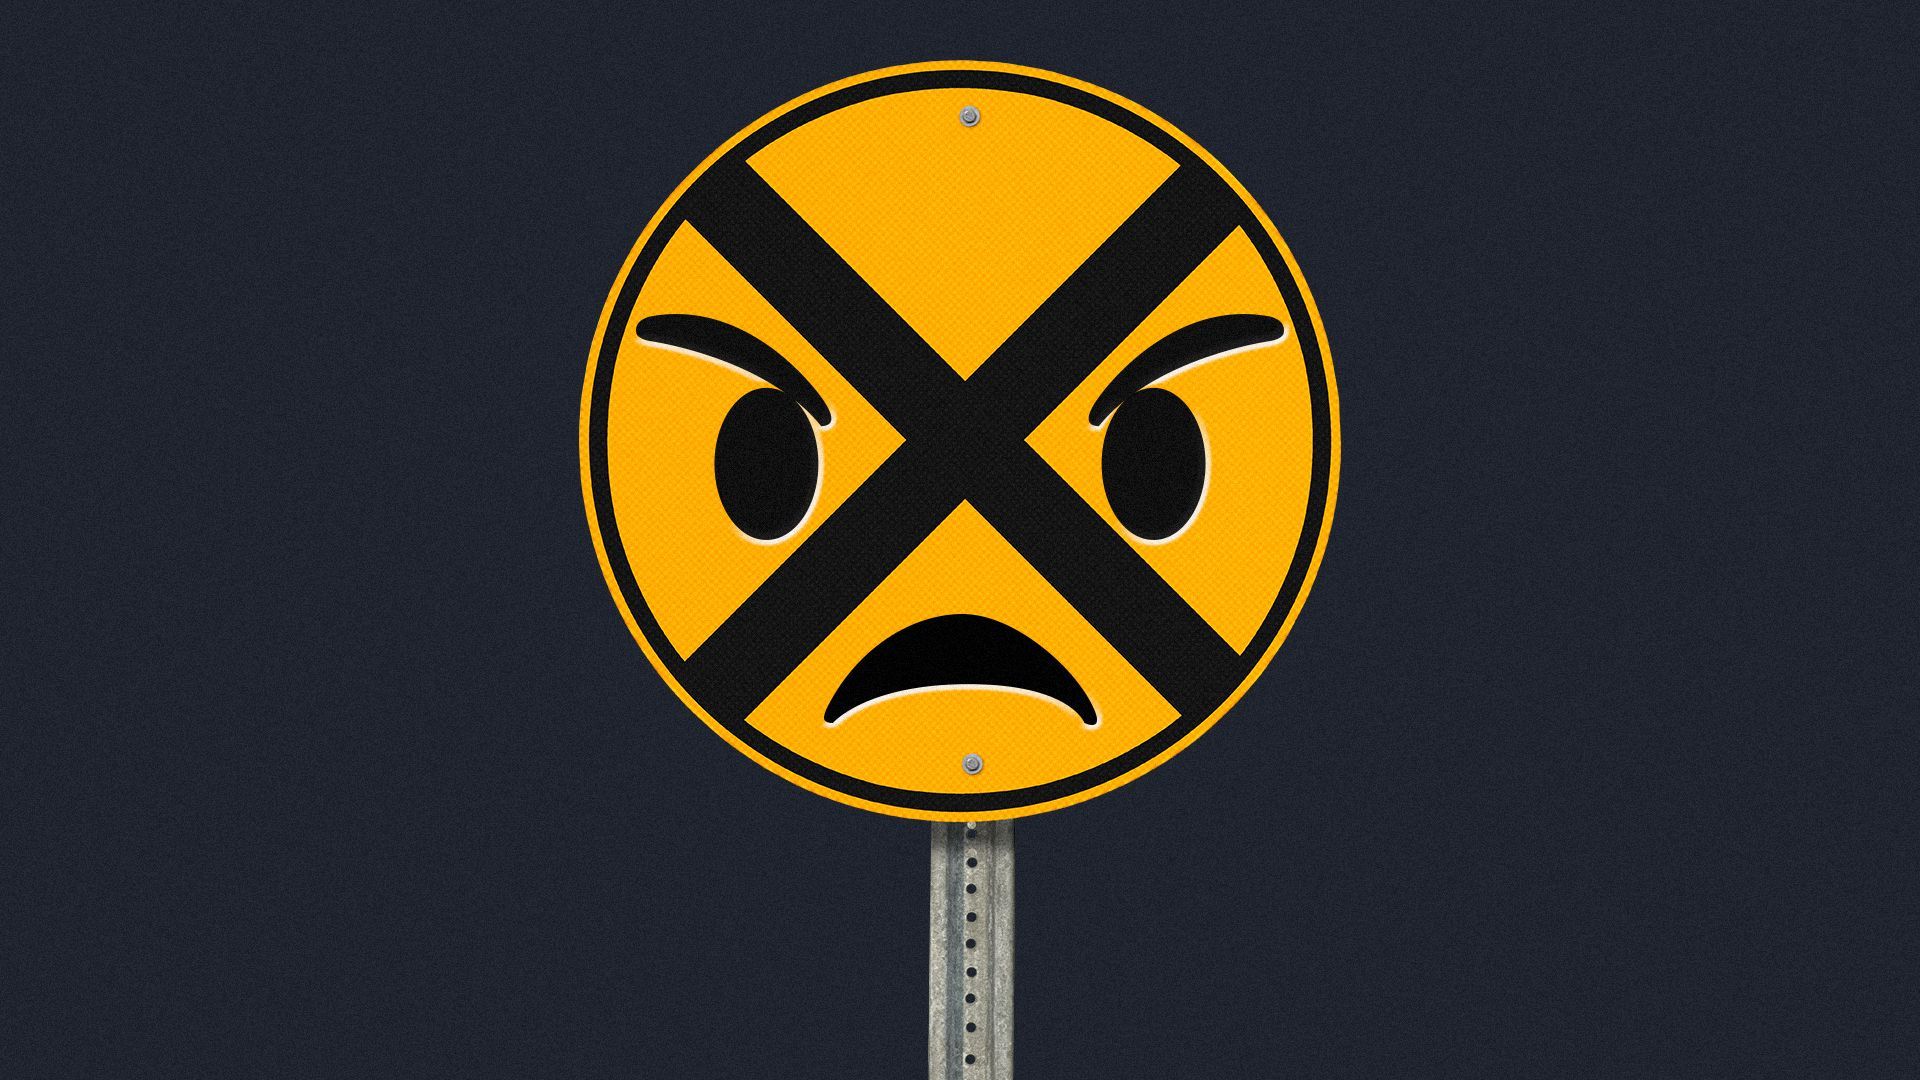 Illustration of an angry emoji on a railroad crossing sign.